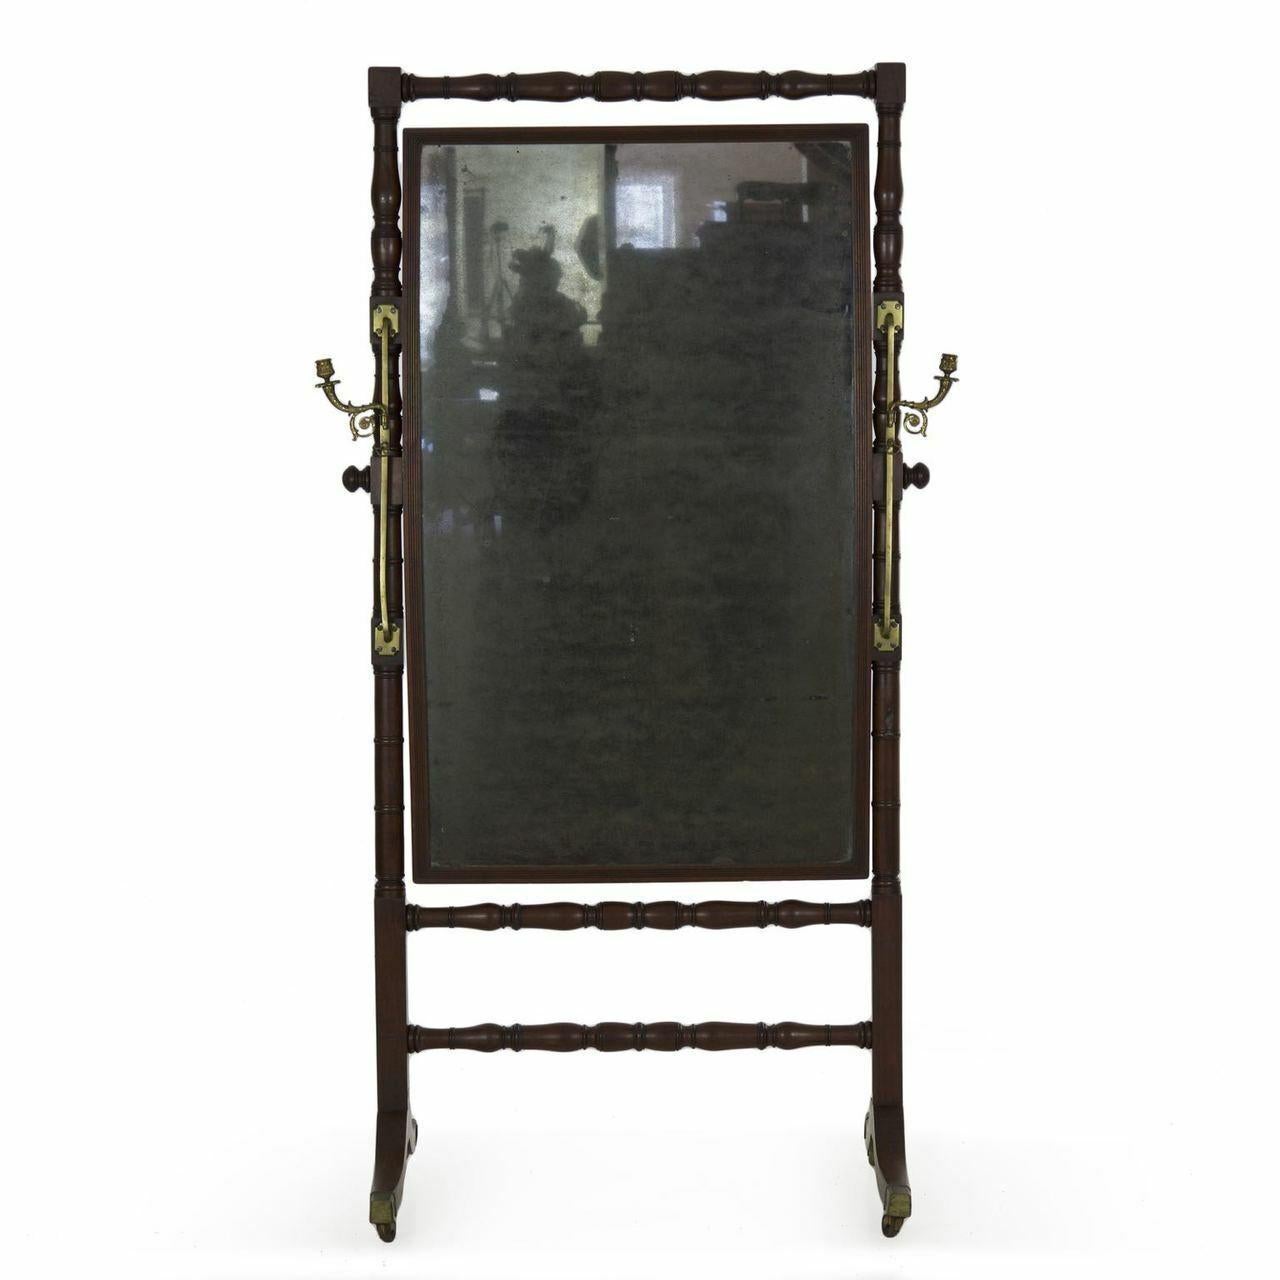 A large and striking cheval mirror from the Regency period, this attractive piece is such an interesting design element with original cast brass hardware and candle sconces and angular form. The turned mahogany frame holds the mahogany box housing